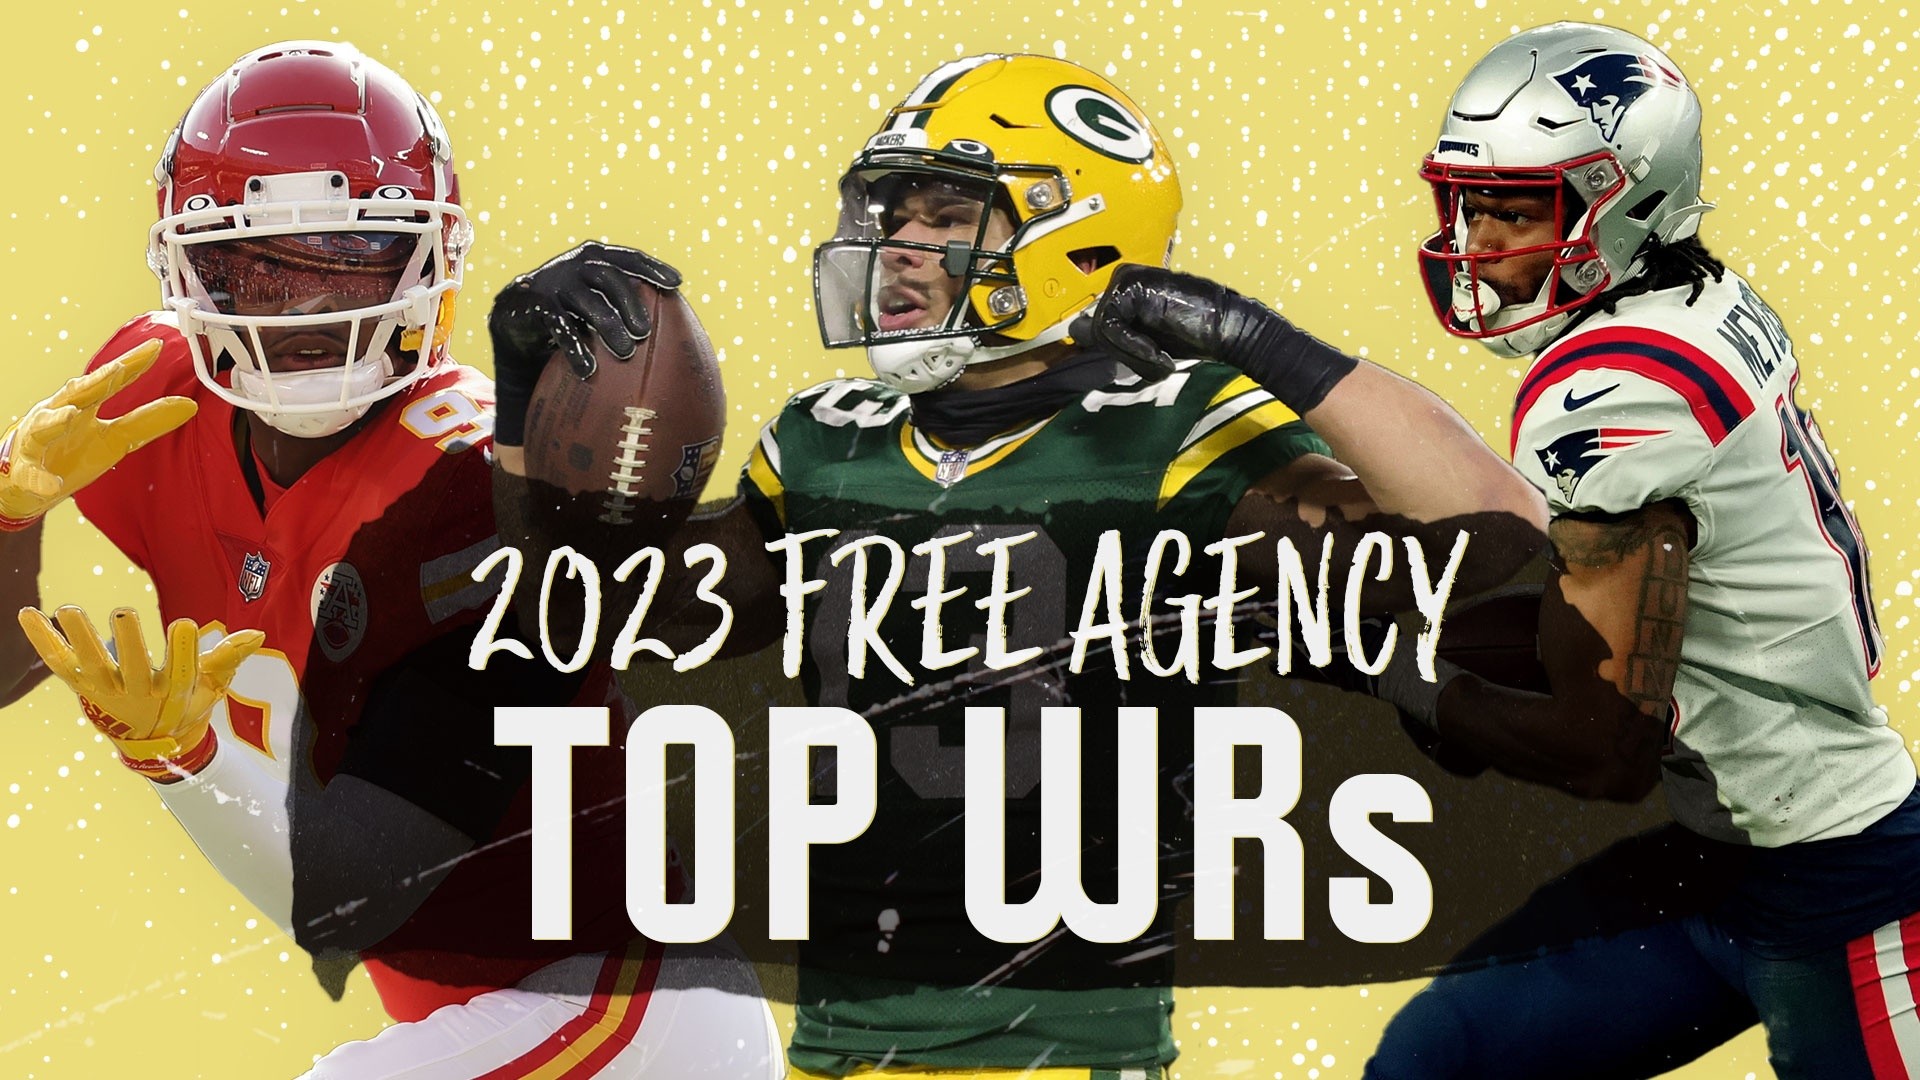 top free agents nfl 2023